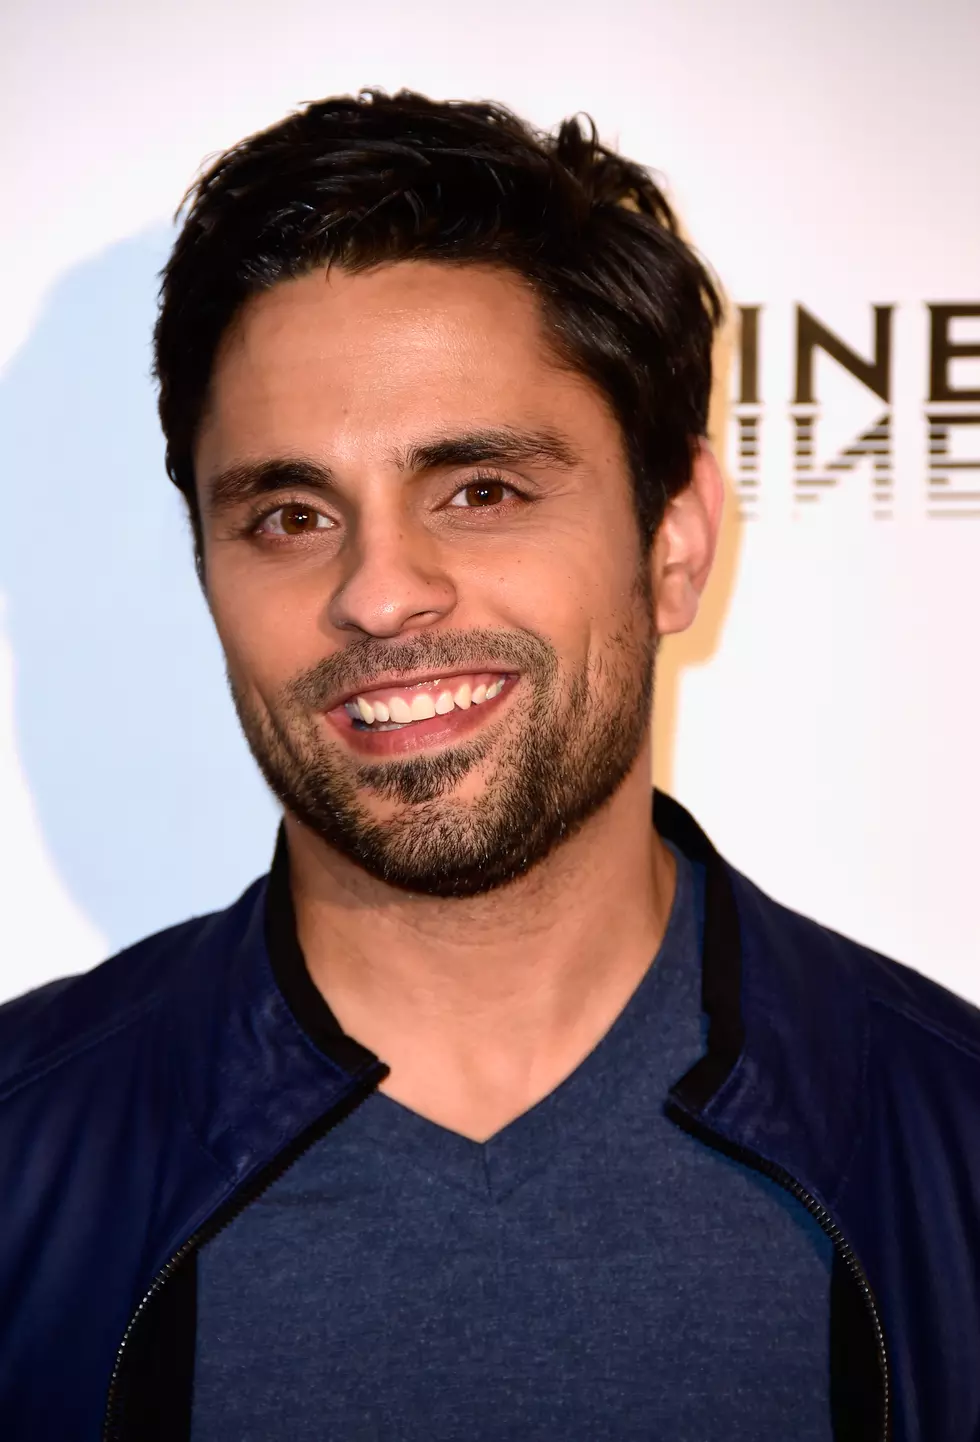 The Comic Jack of All Traits Ray William Johnson heading to El Paso